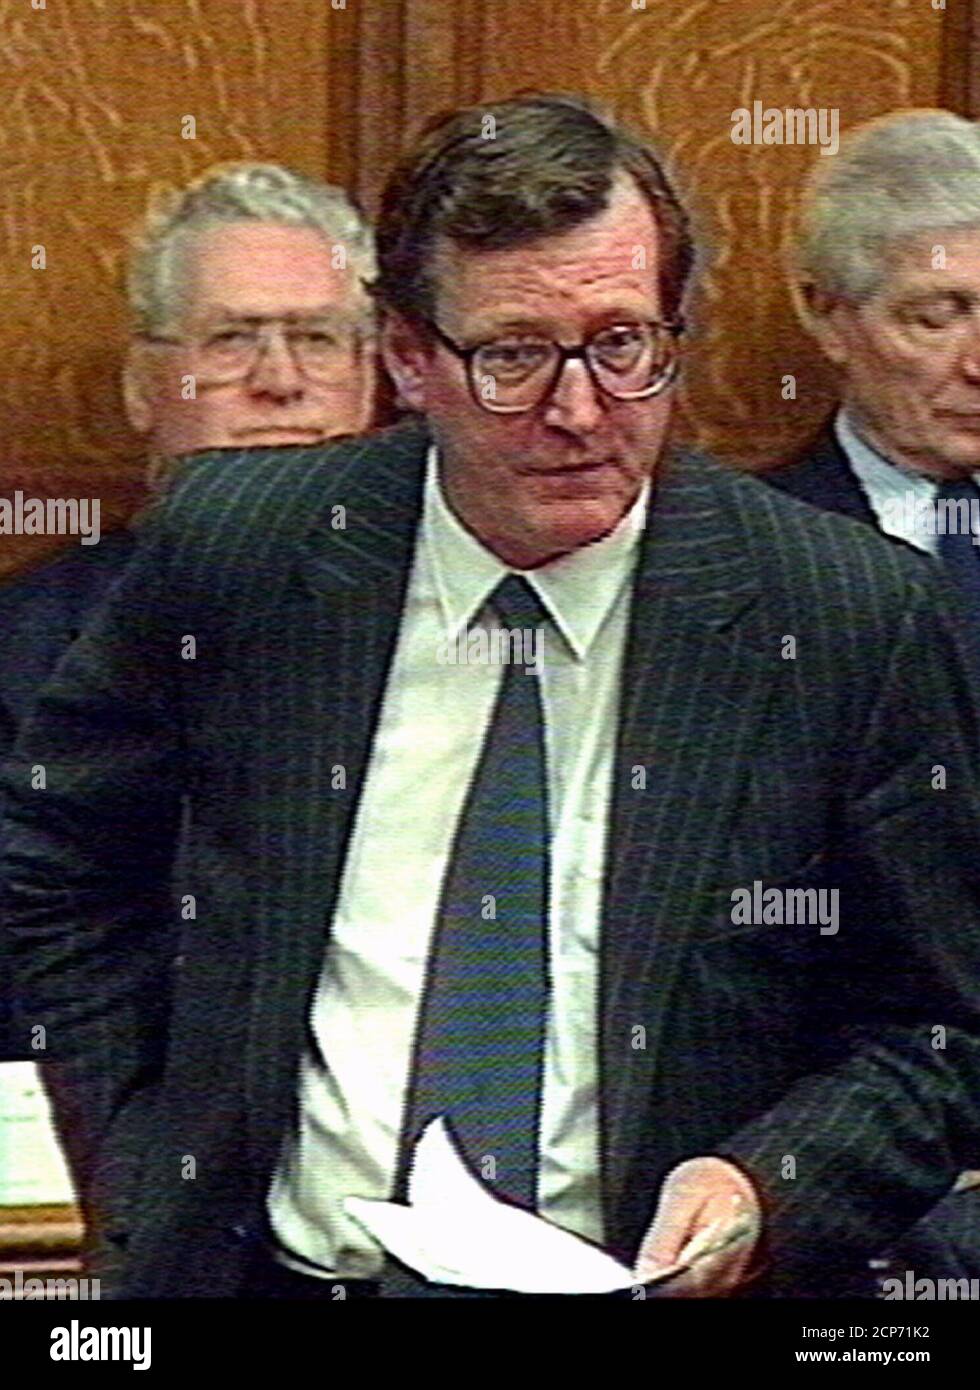 Leader of the Ulster Unionists David Trimble speaks to the House of Commons, March 21. Trimble said Mr Major should have stuck to the existing proportional representation system of elections in Northern Ireland rather than have allowed himself to be 'blown off course' by the 'unholy alliance' of the Irish Goverment, the SDLP and DUP.  BRITAIN IRISH Stock Photo